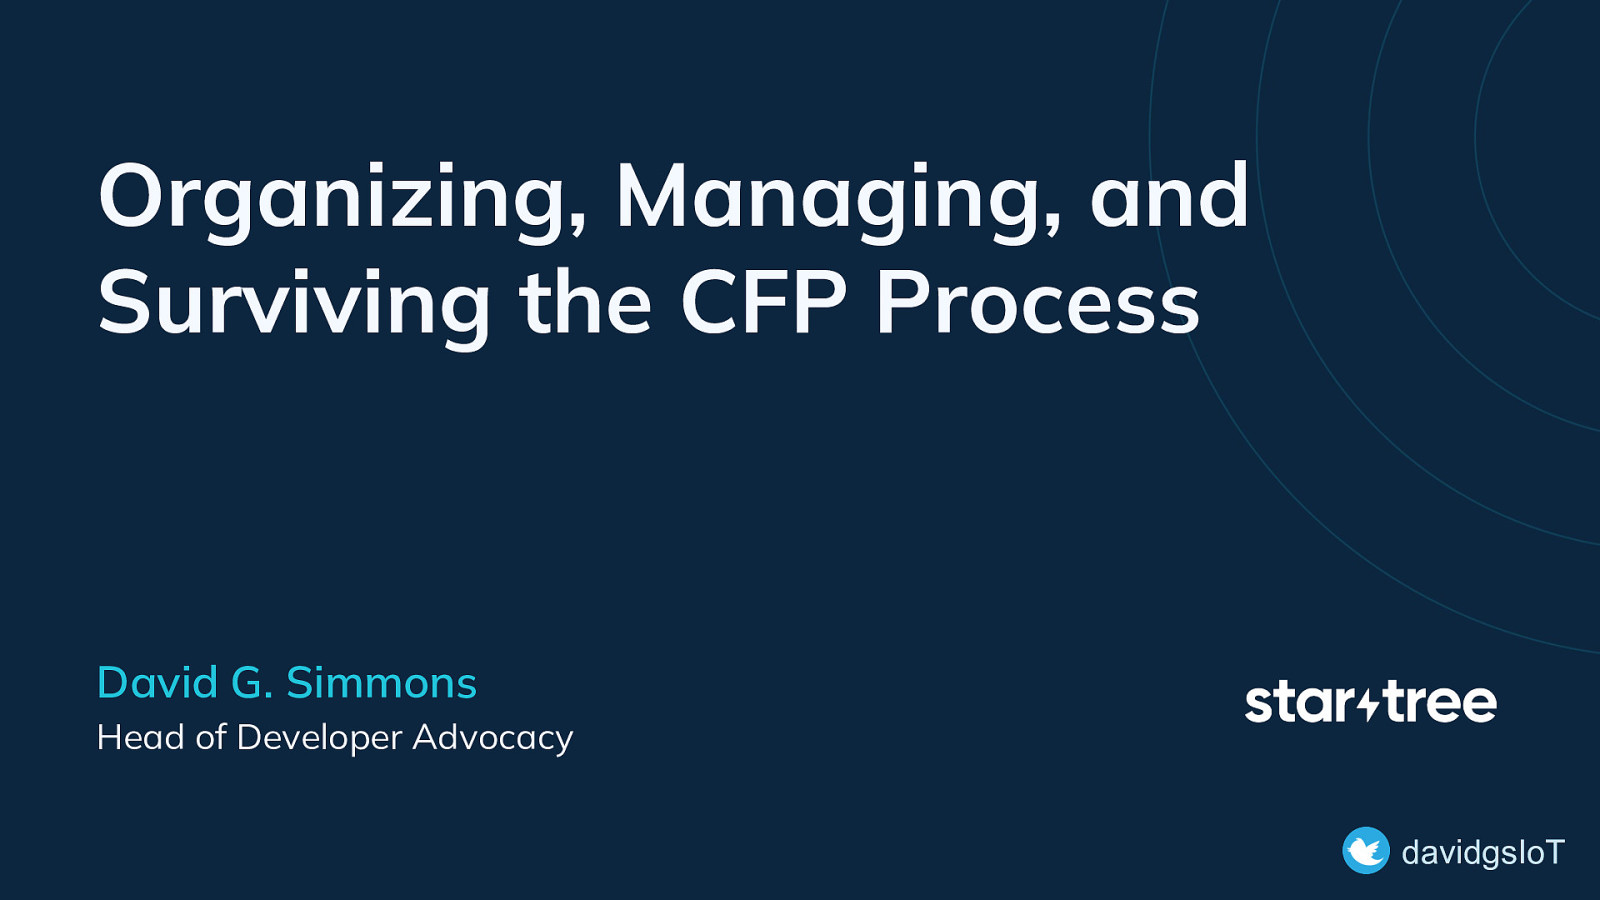 Organizing, Managing, and Surviving the CFP Process